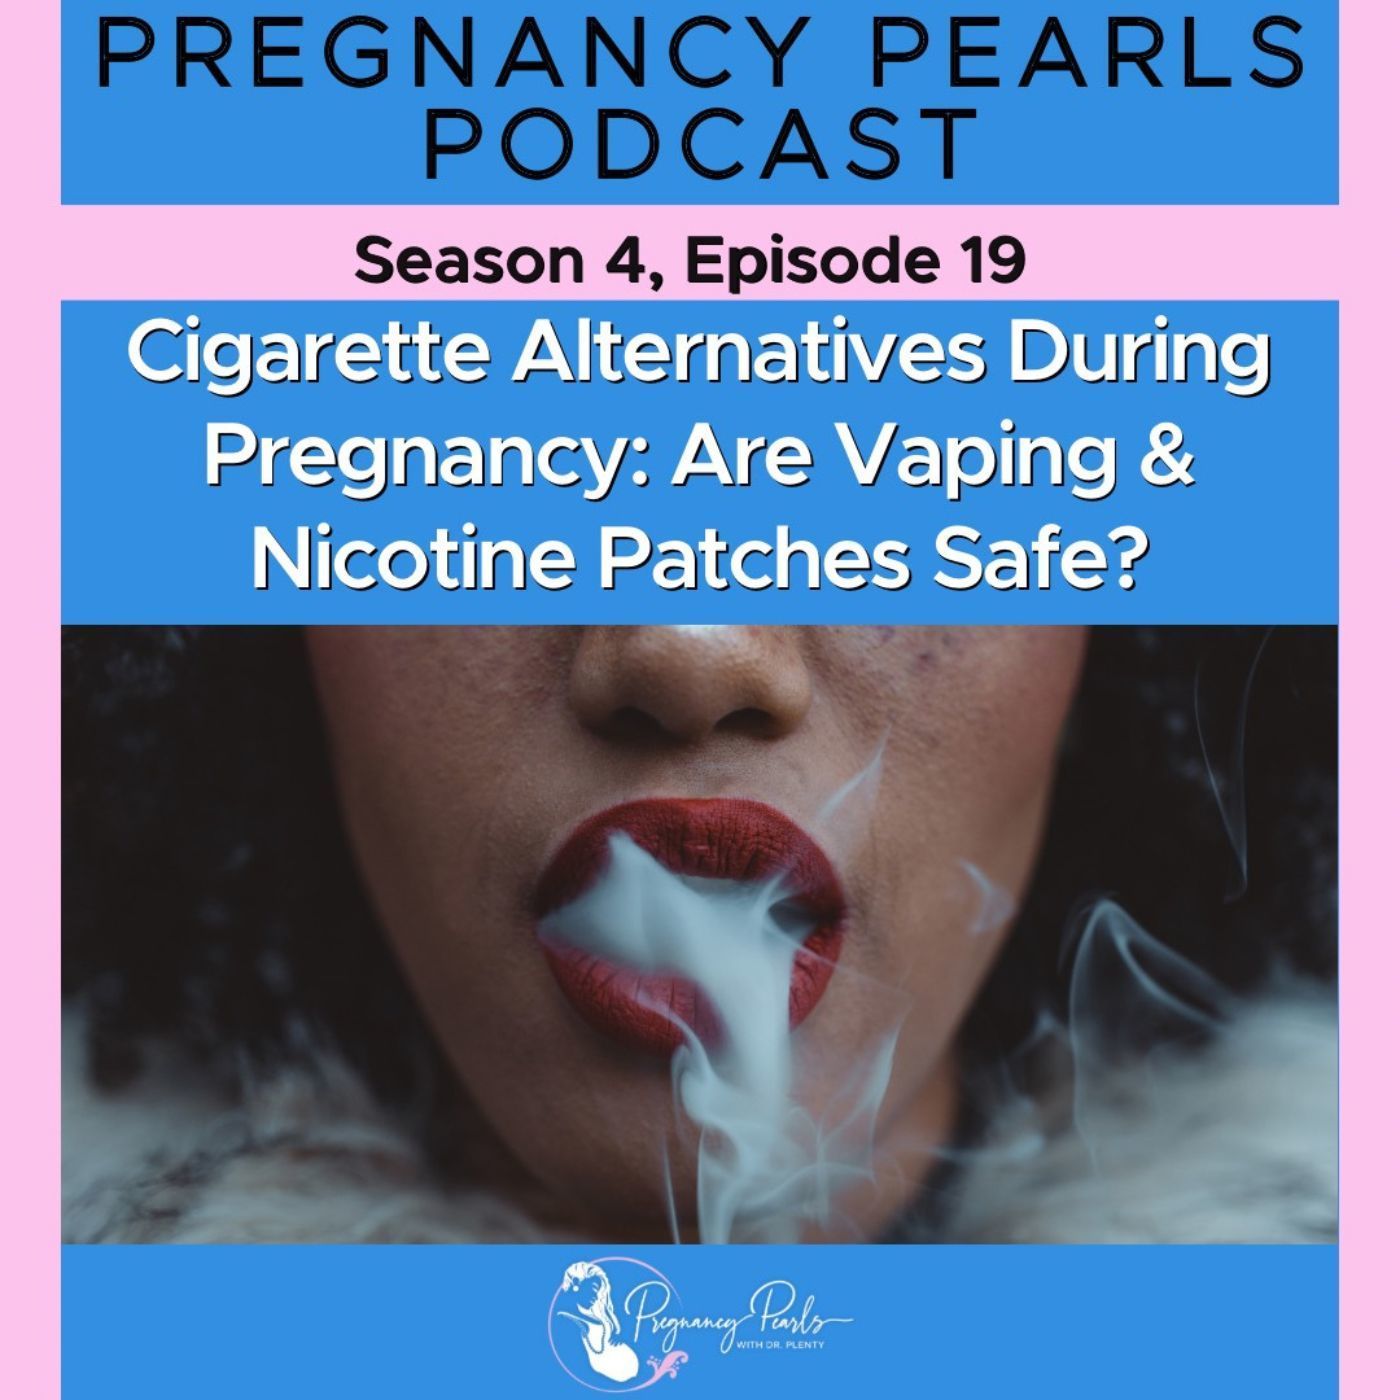 Cigarette Alternatives During Pregnancy: Are Vaping and Nicotine Patches Safe?